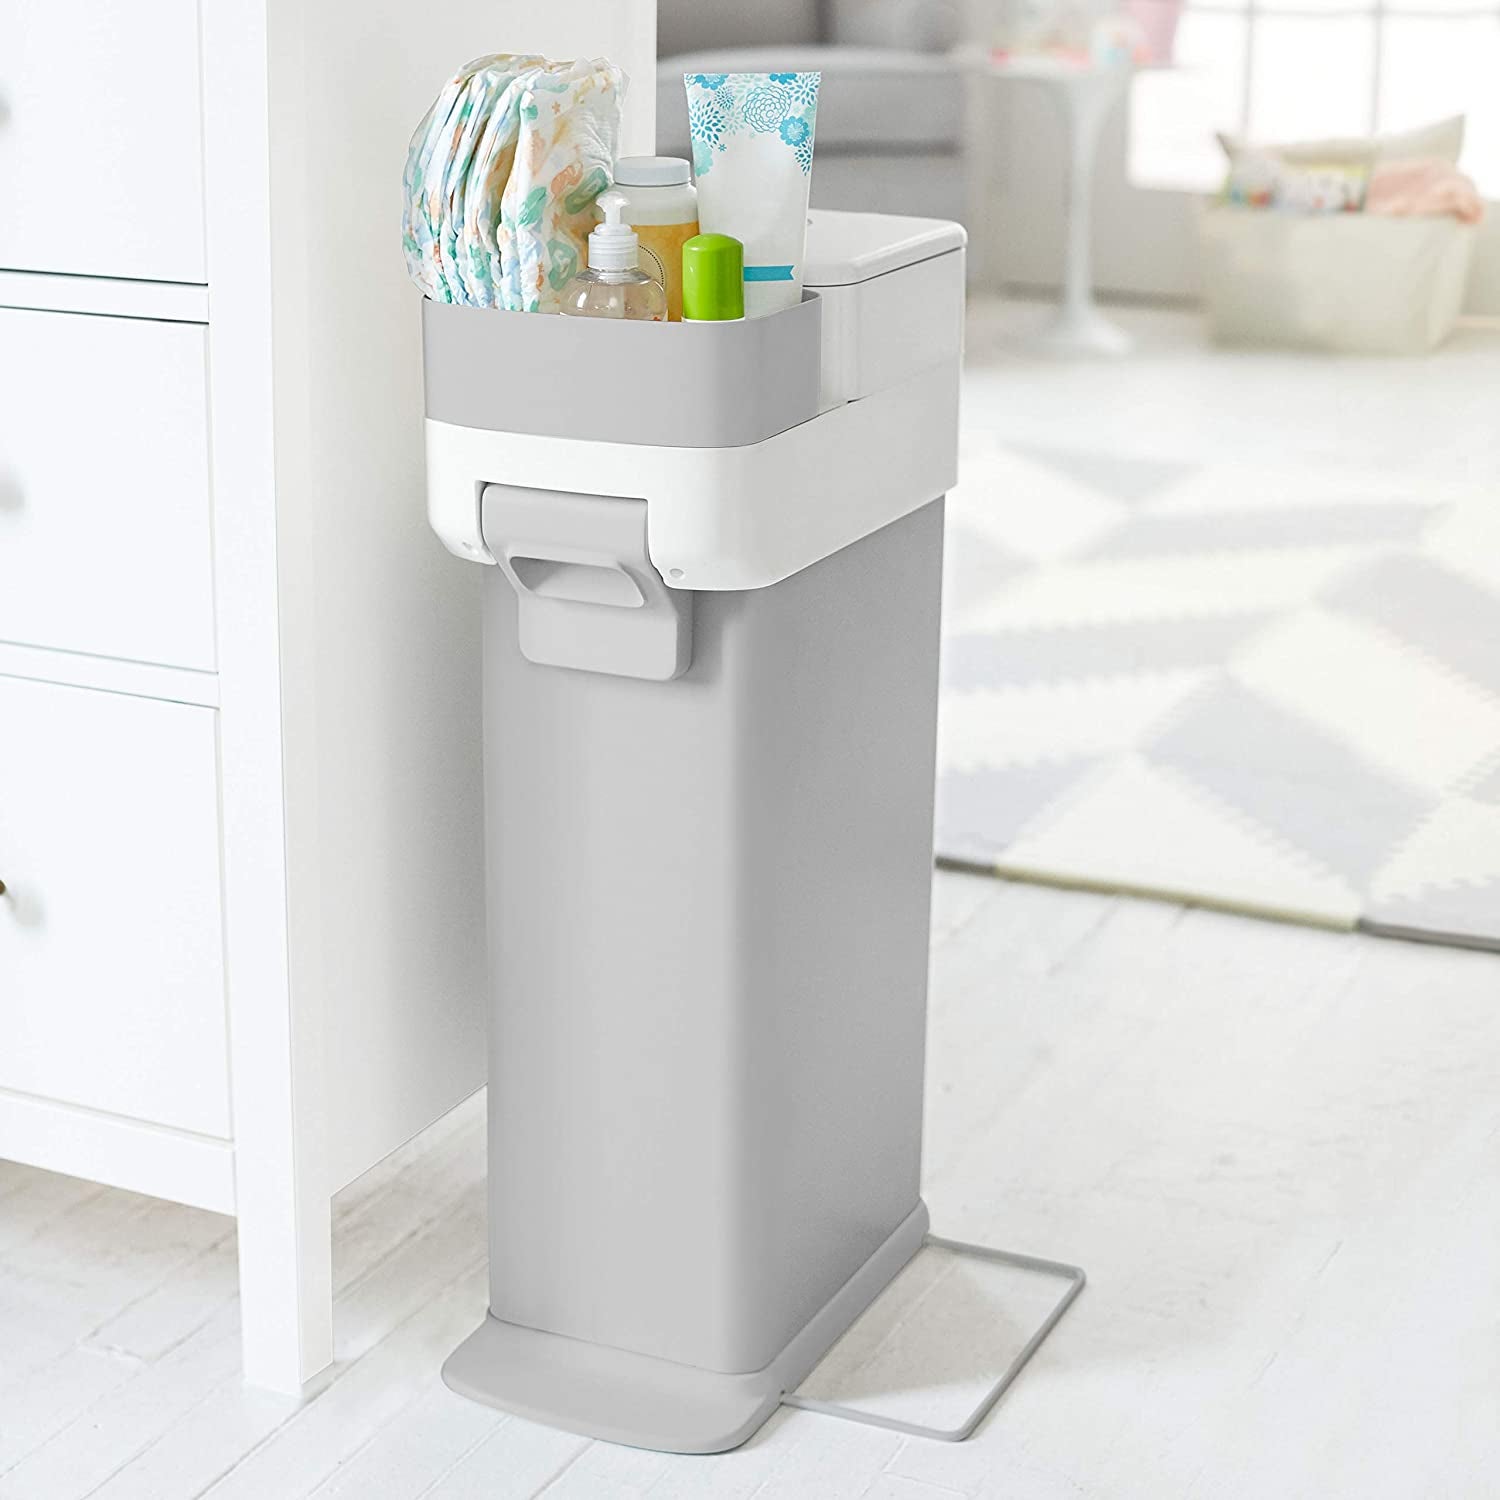 a gray diaper trash can with a caddy on top